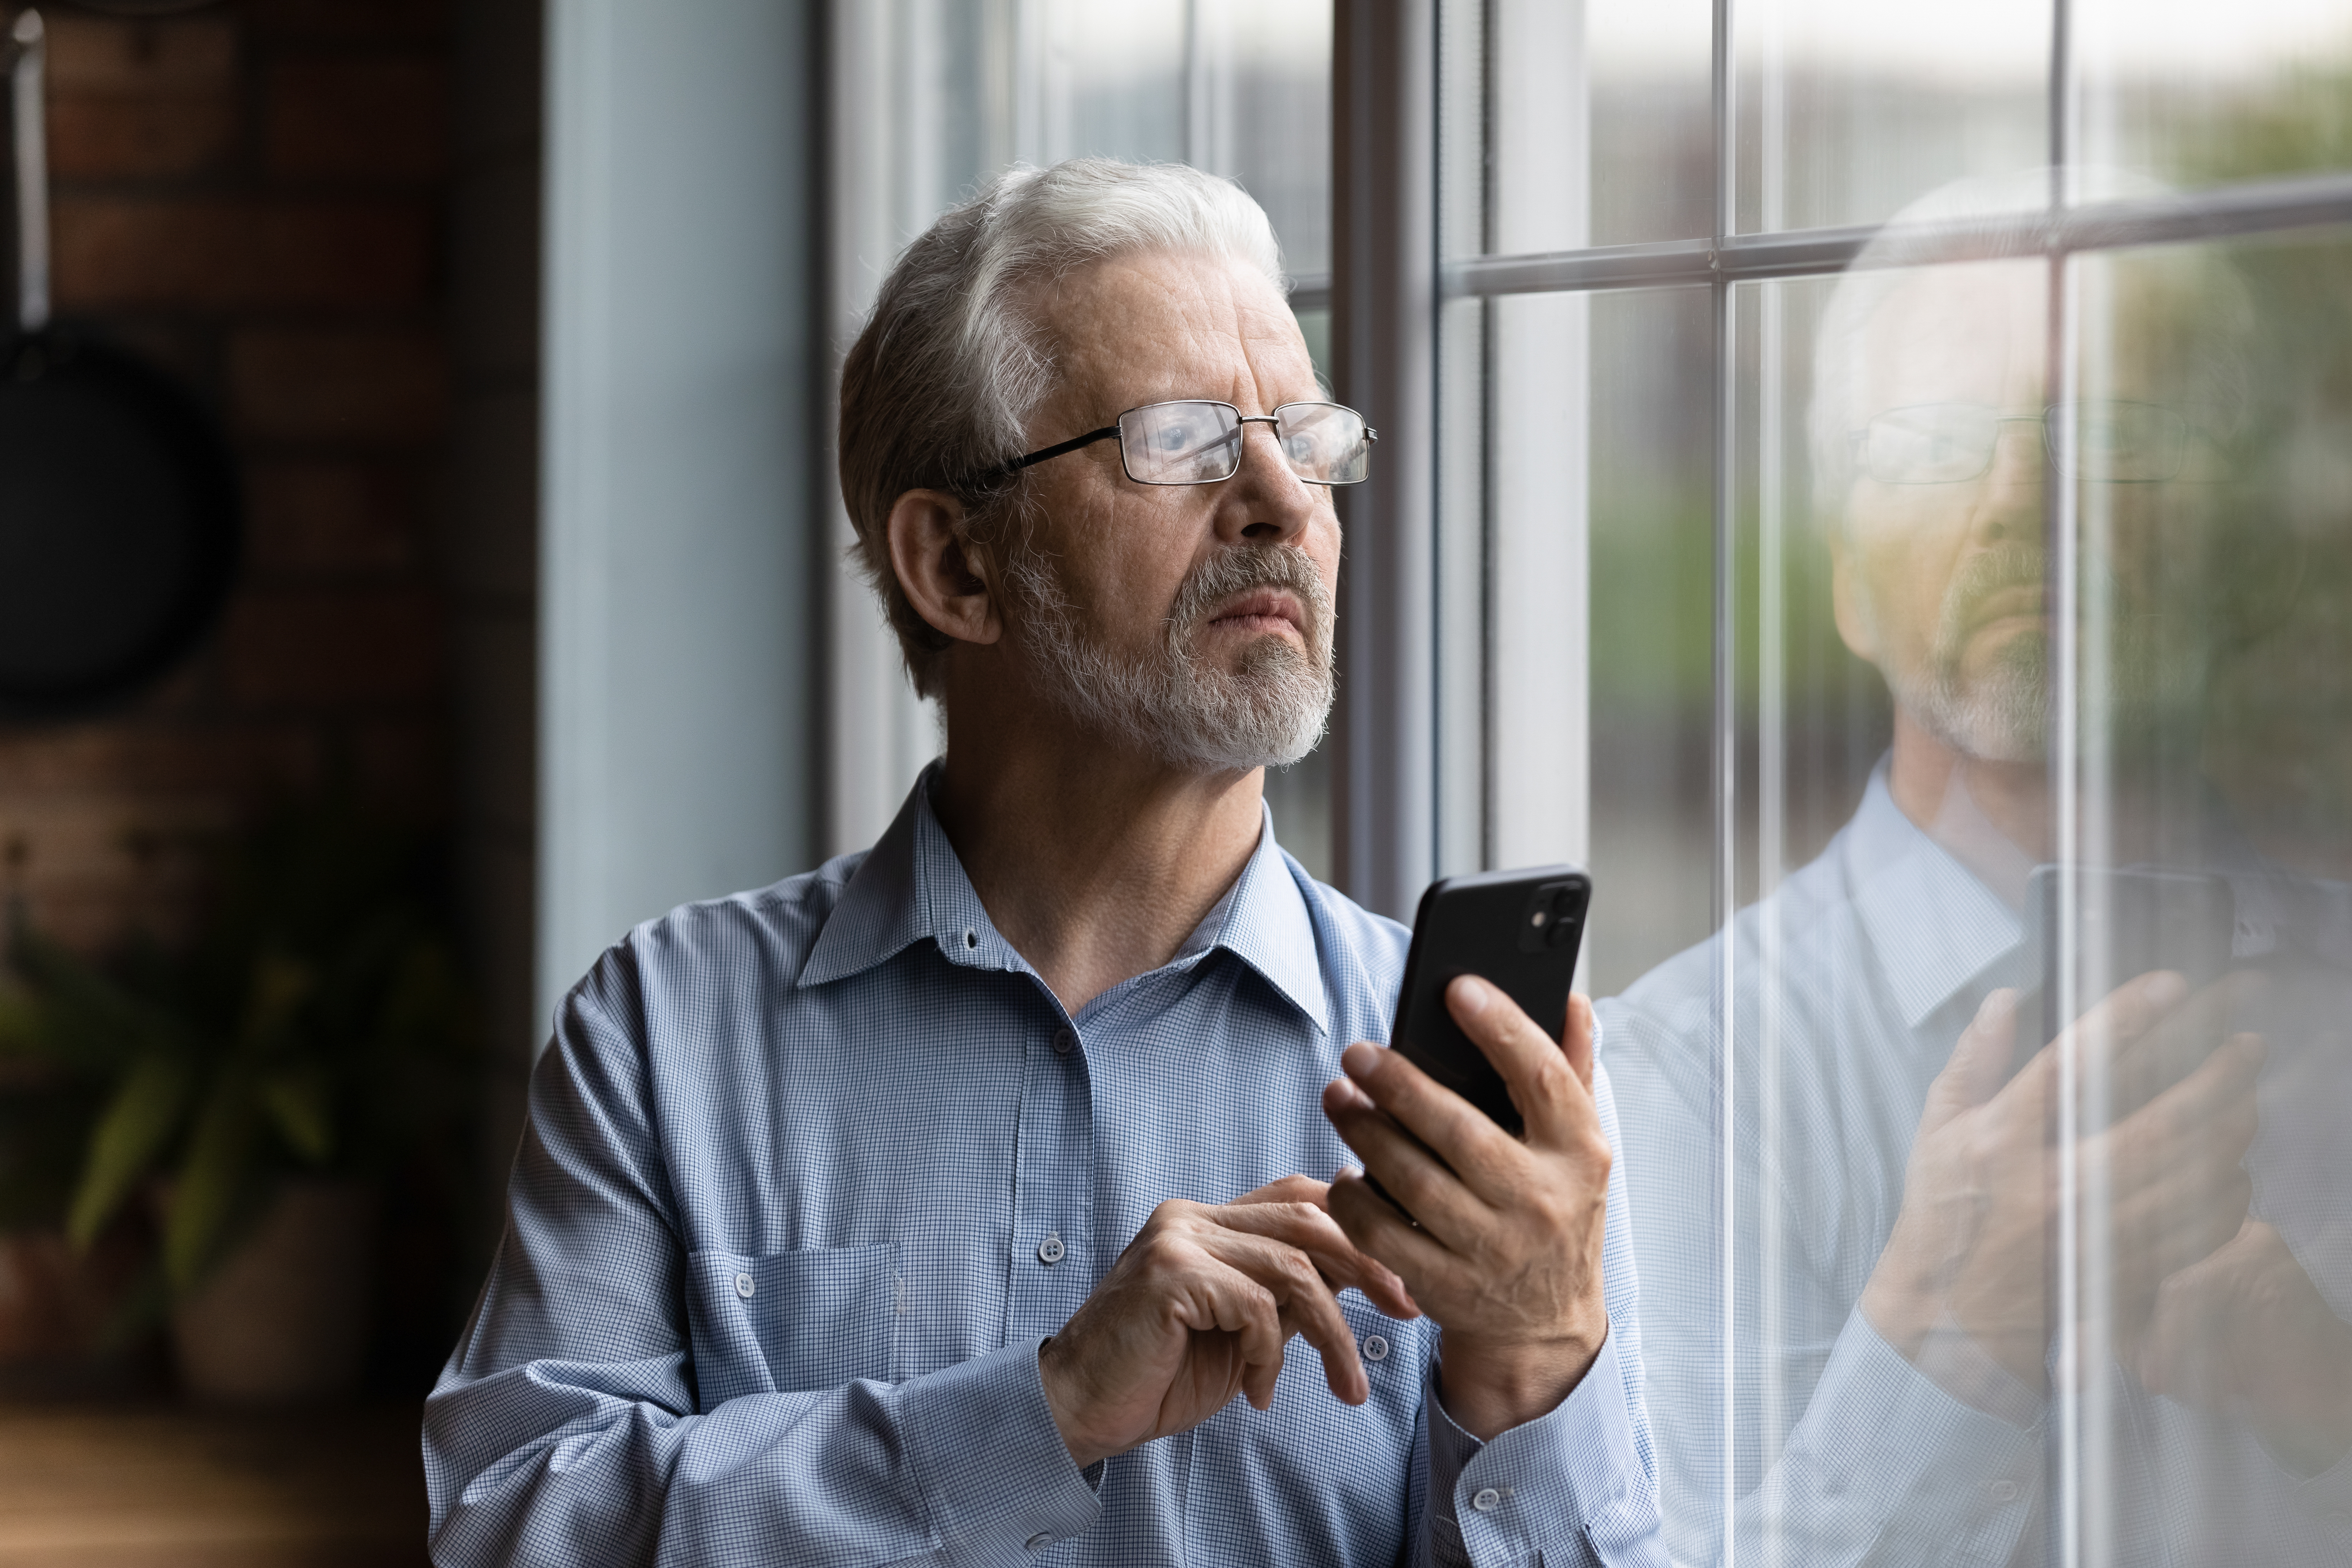 A man looking outside a window with a phone in his hand | Source: Shutterstock